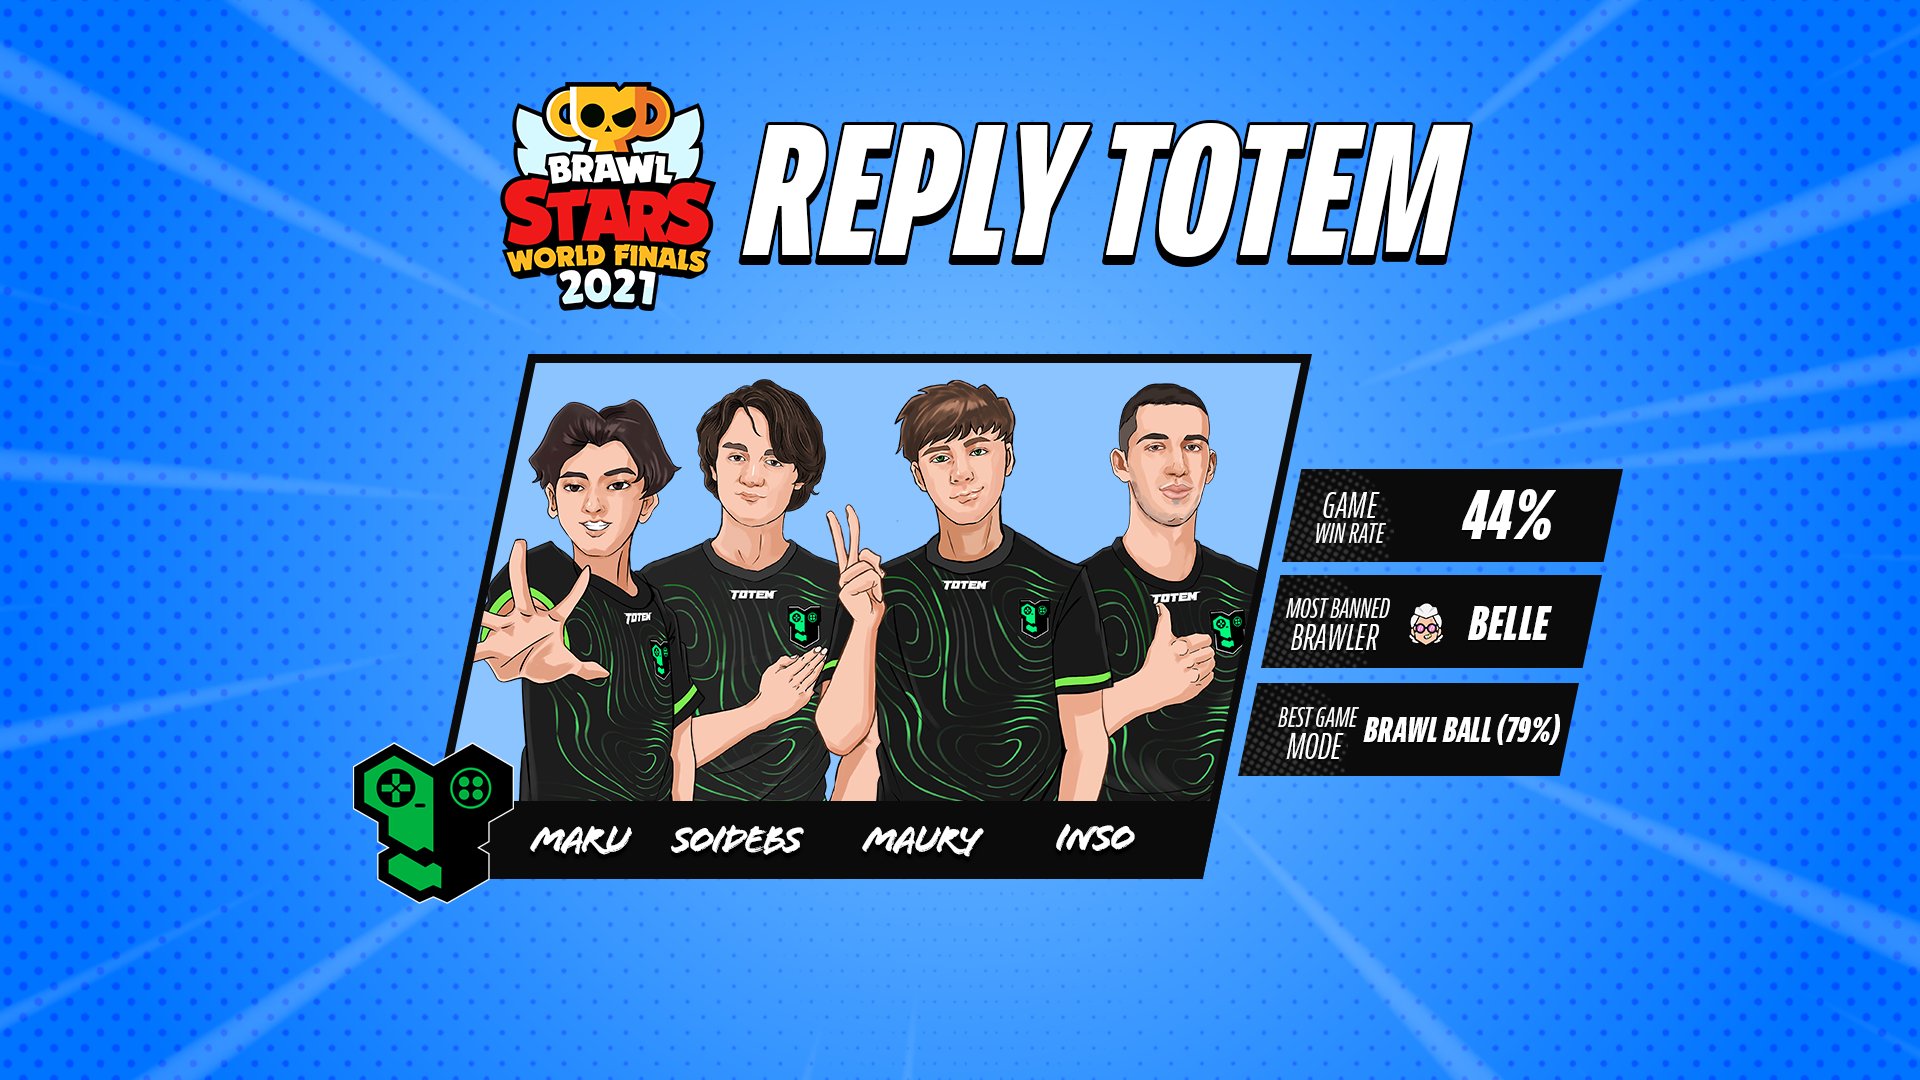 Reply Totem lands in Paris for the event of the year: The Brawl Stars World  Finals are looking for their new Kings! - News - Reply Totem